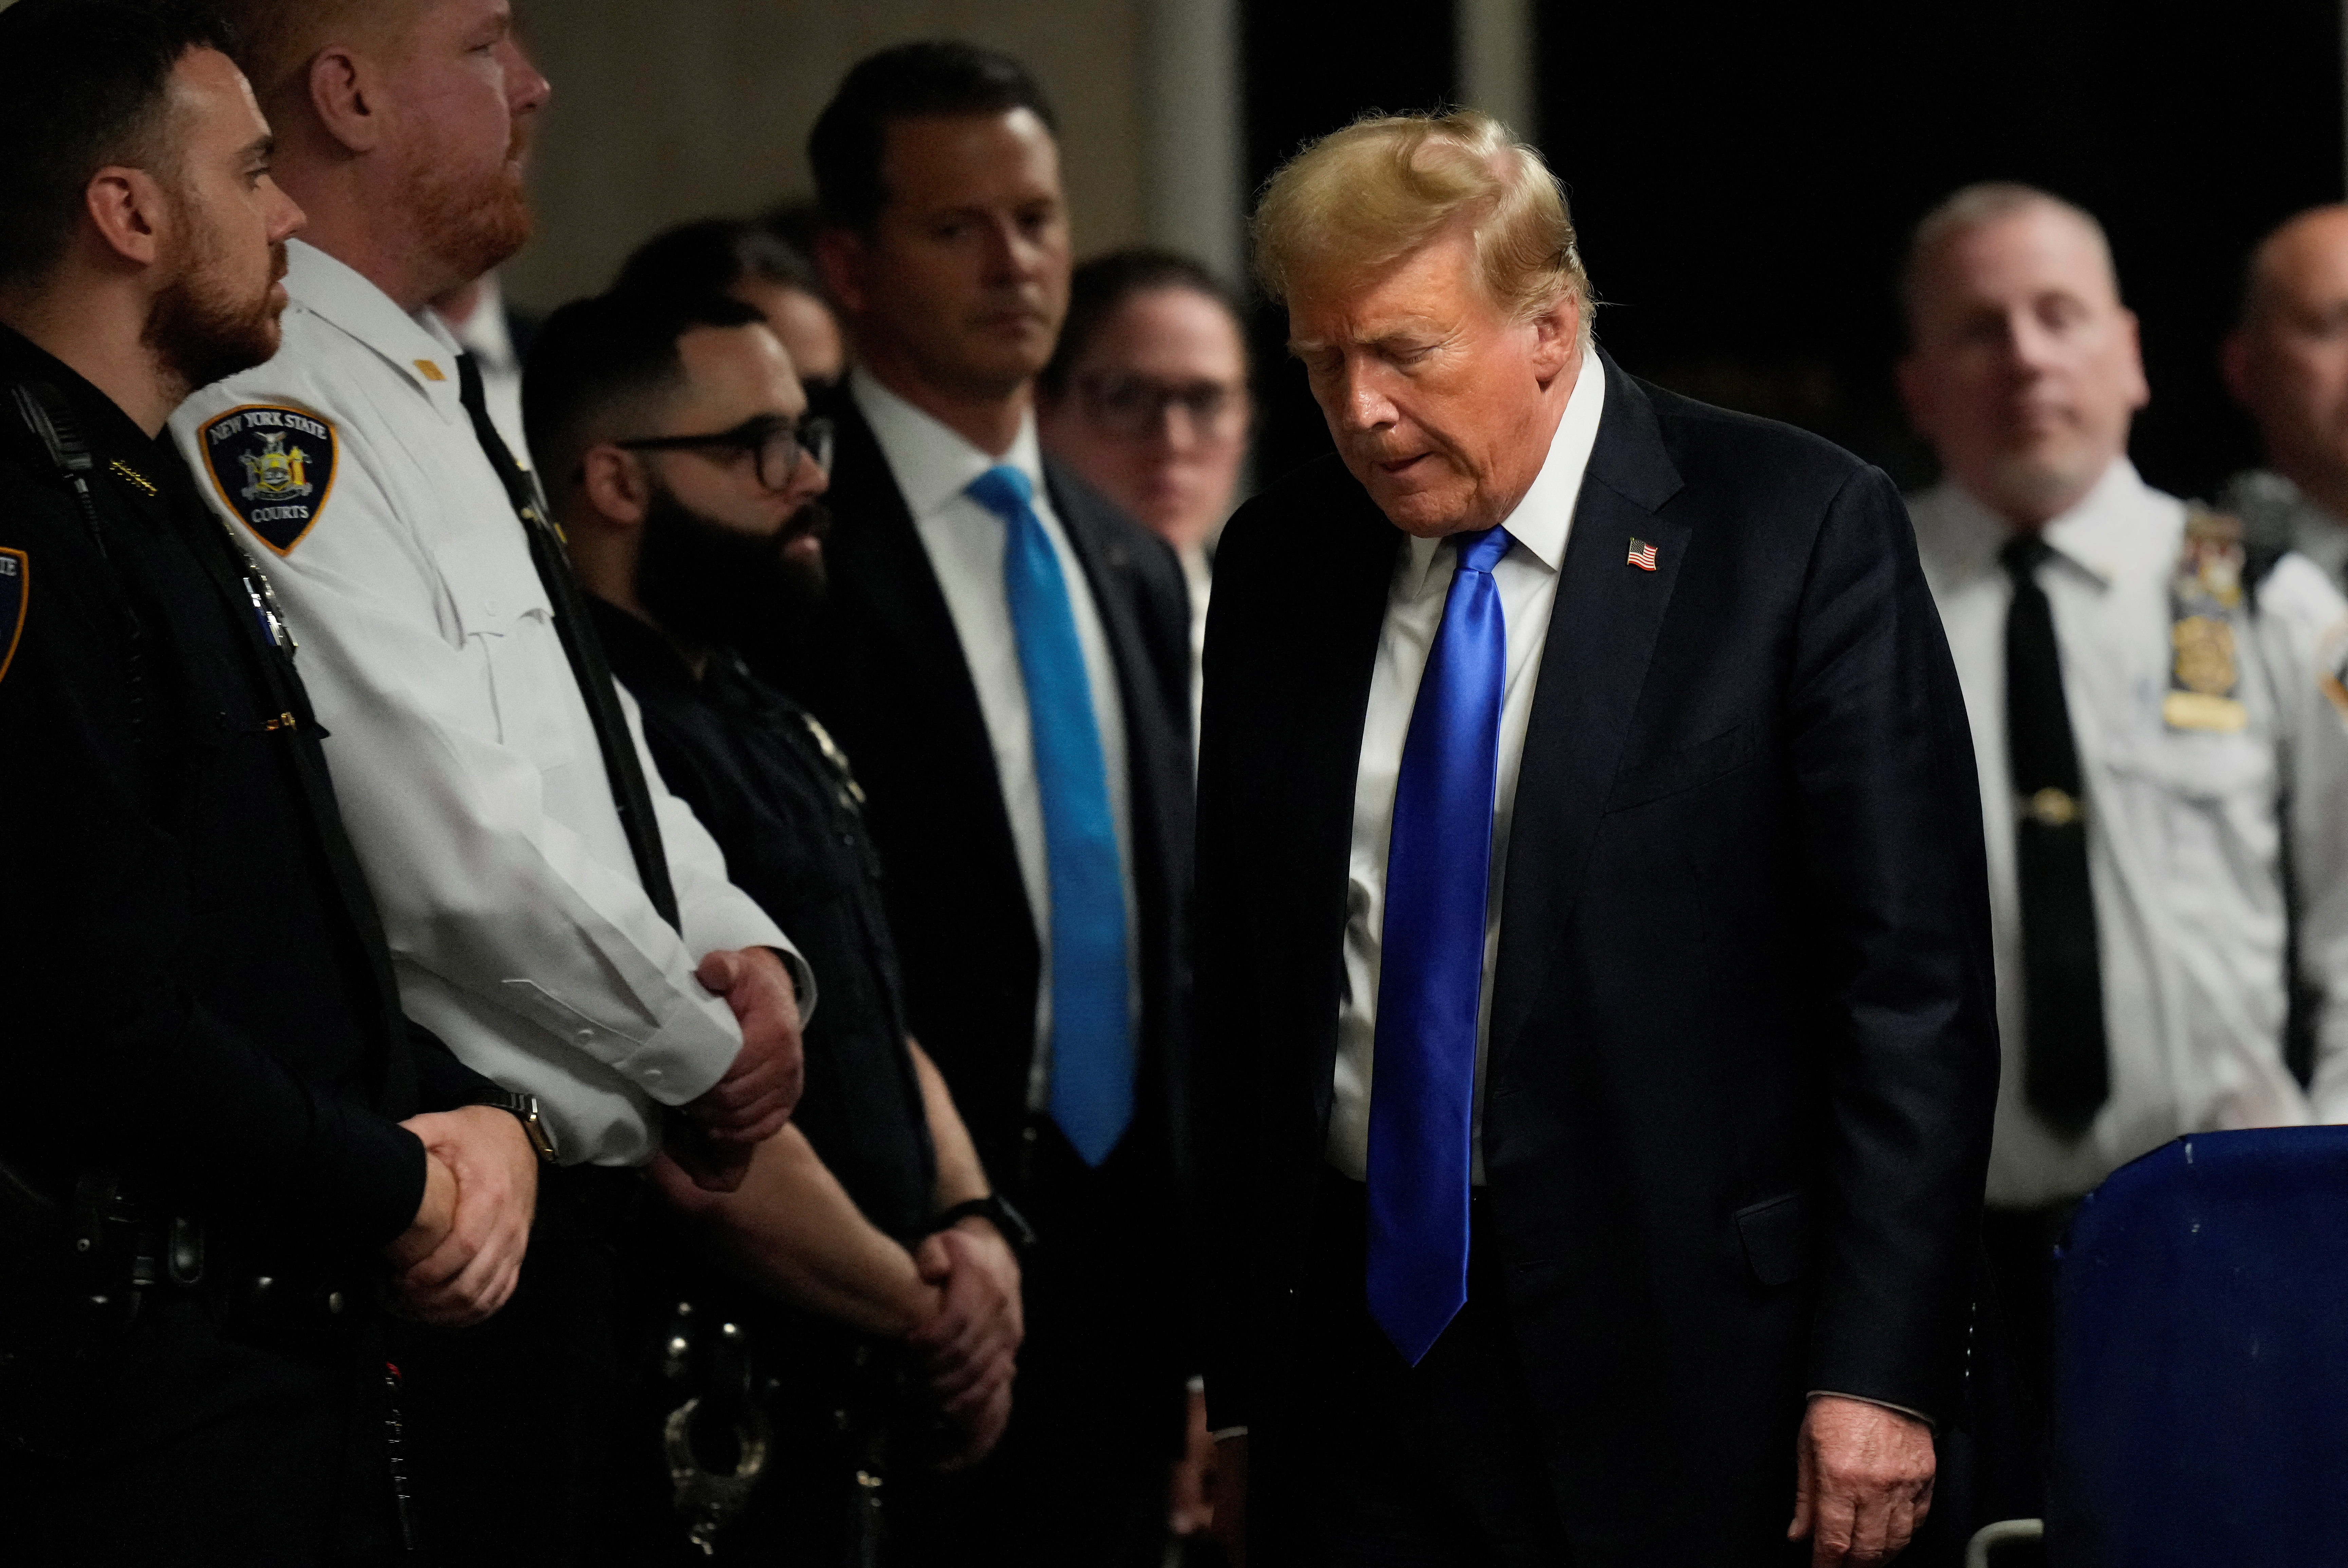 Former US president Donald Trump Former President Donald Trump leaves Manhattan Criminal Court in New York City on Thursday after being found guilty on 34 felony counts of falsifying business records in the first degree. Photo: AP